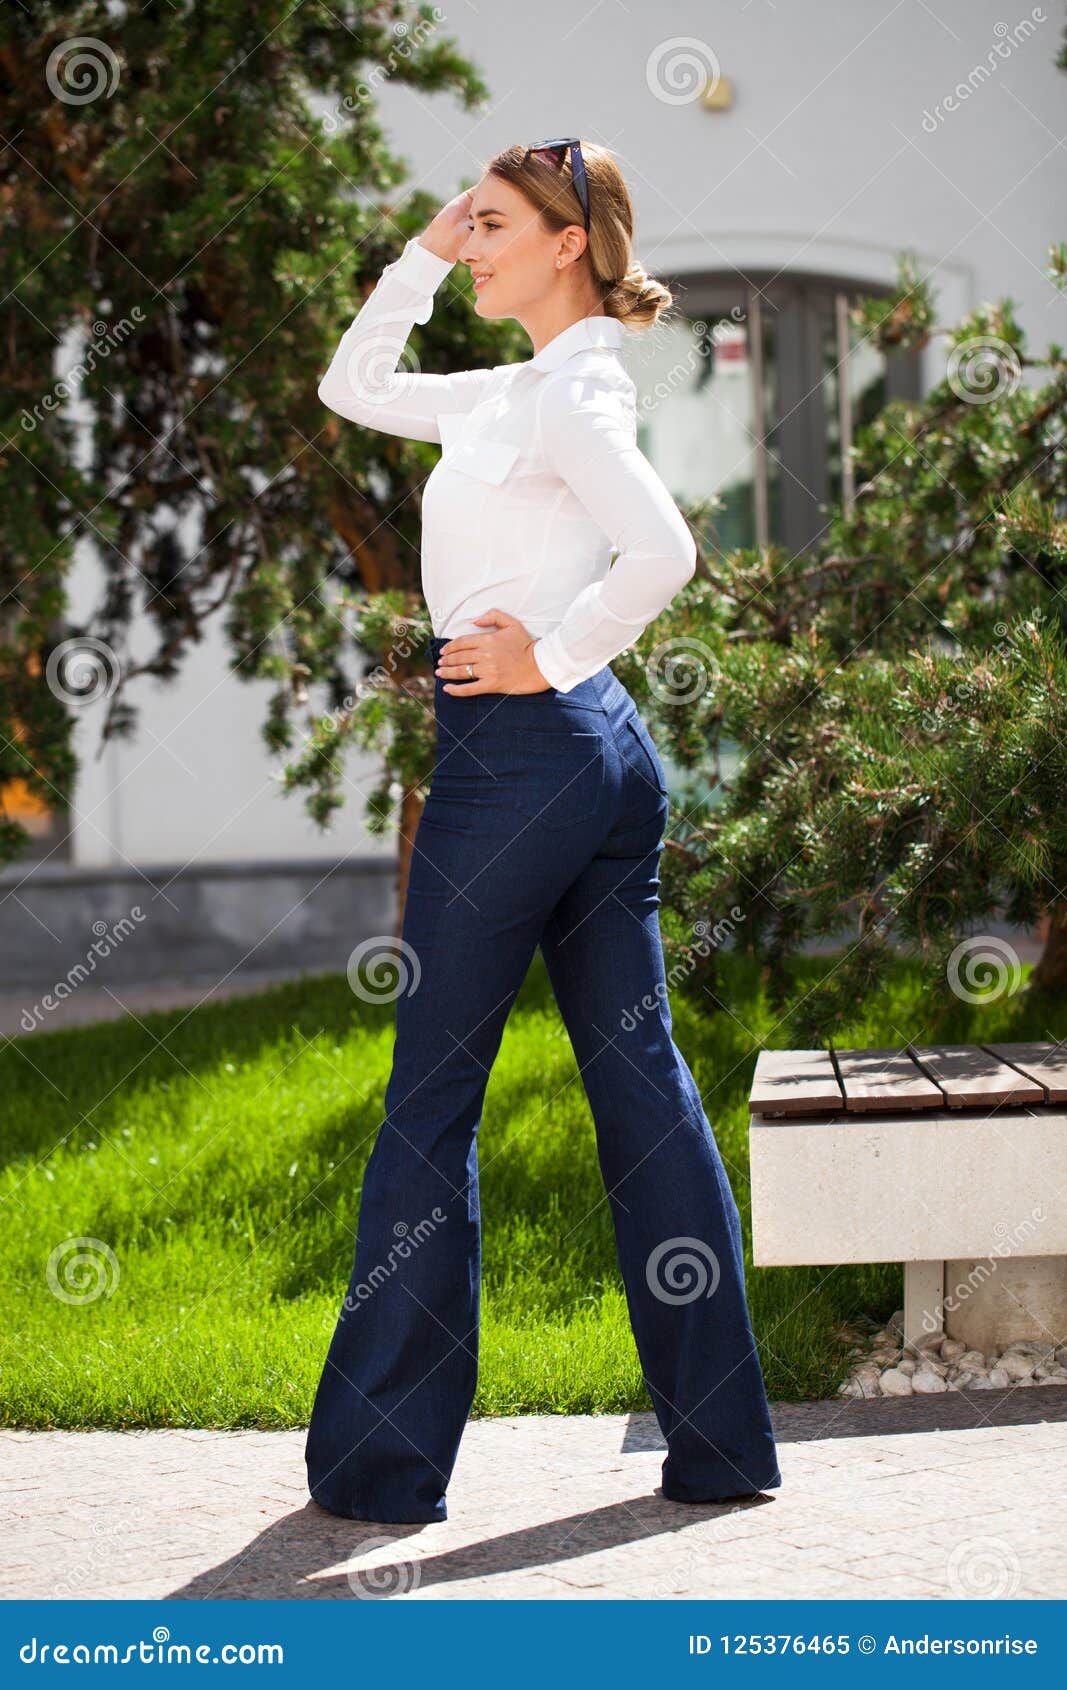 Blue Jeans And White Shirt Stock Photo